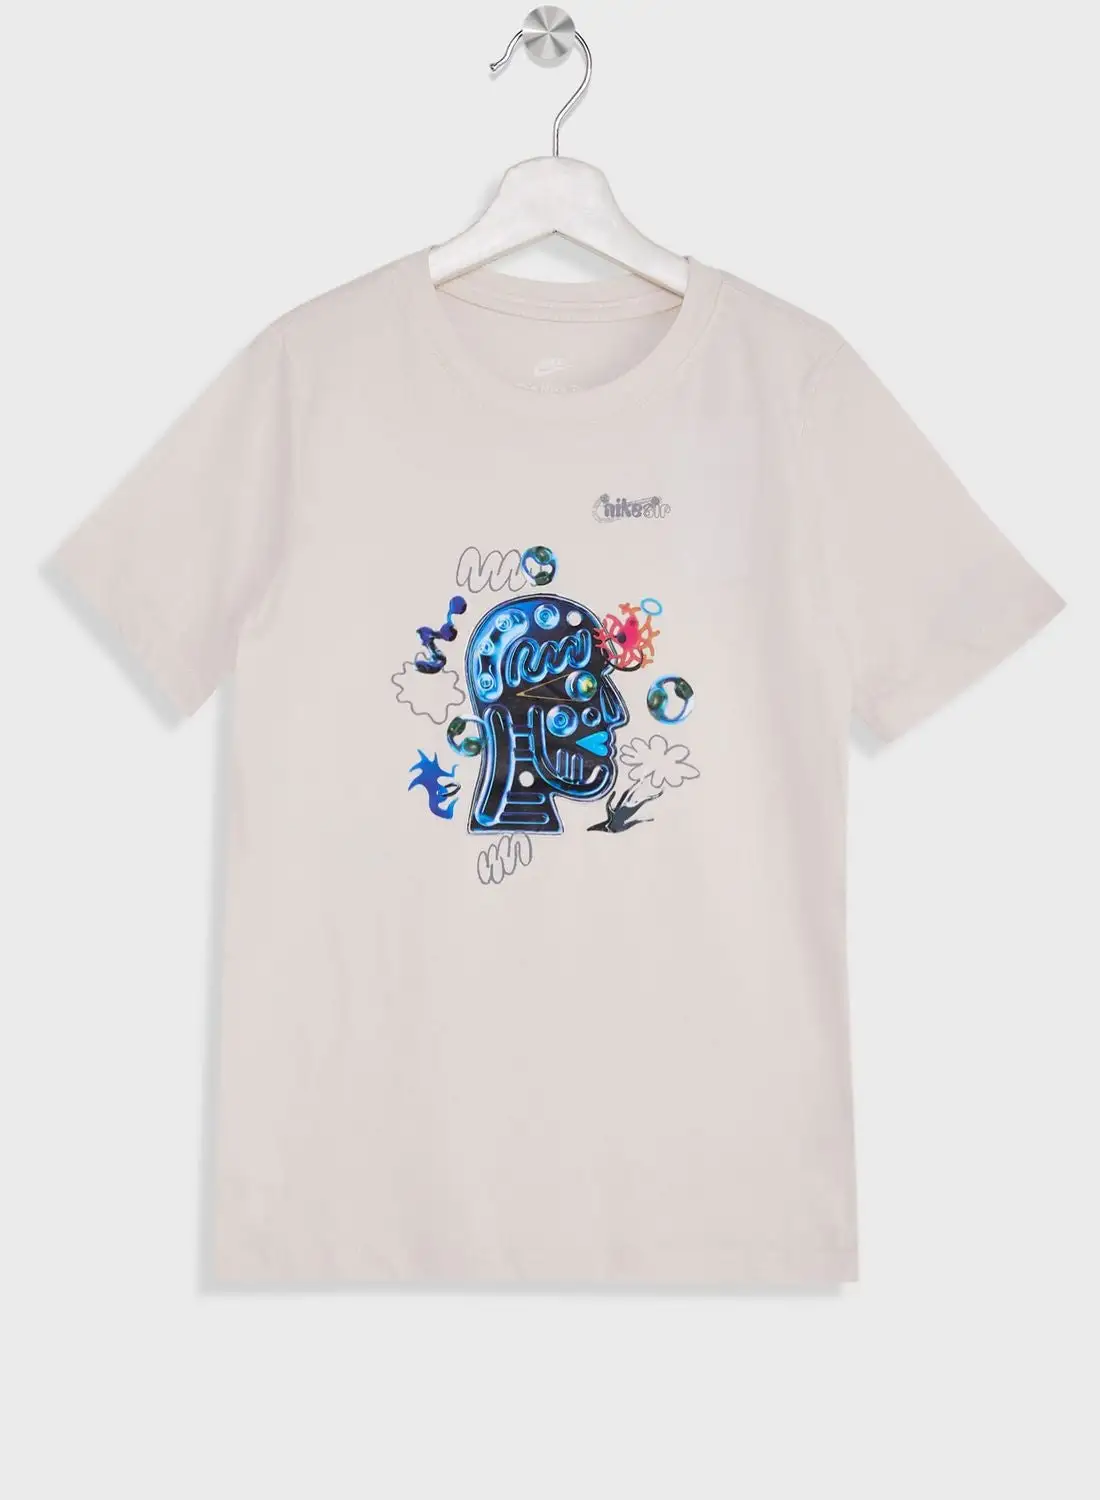 Nike Youth Nsw Air Max Day T-Shirt